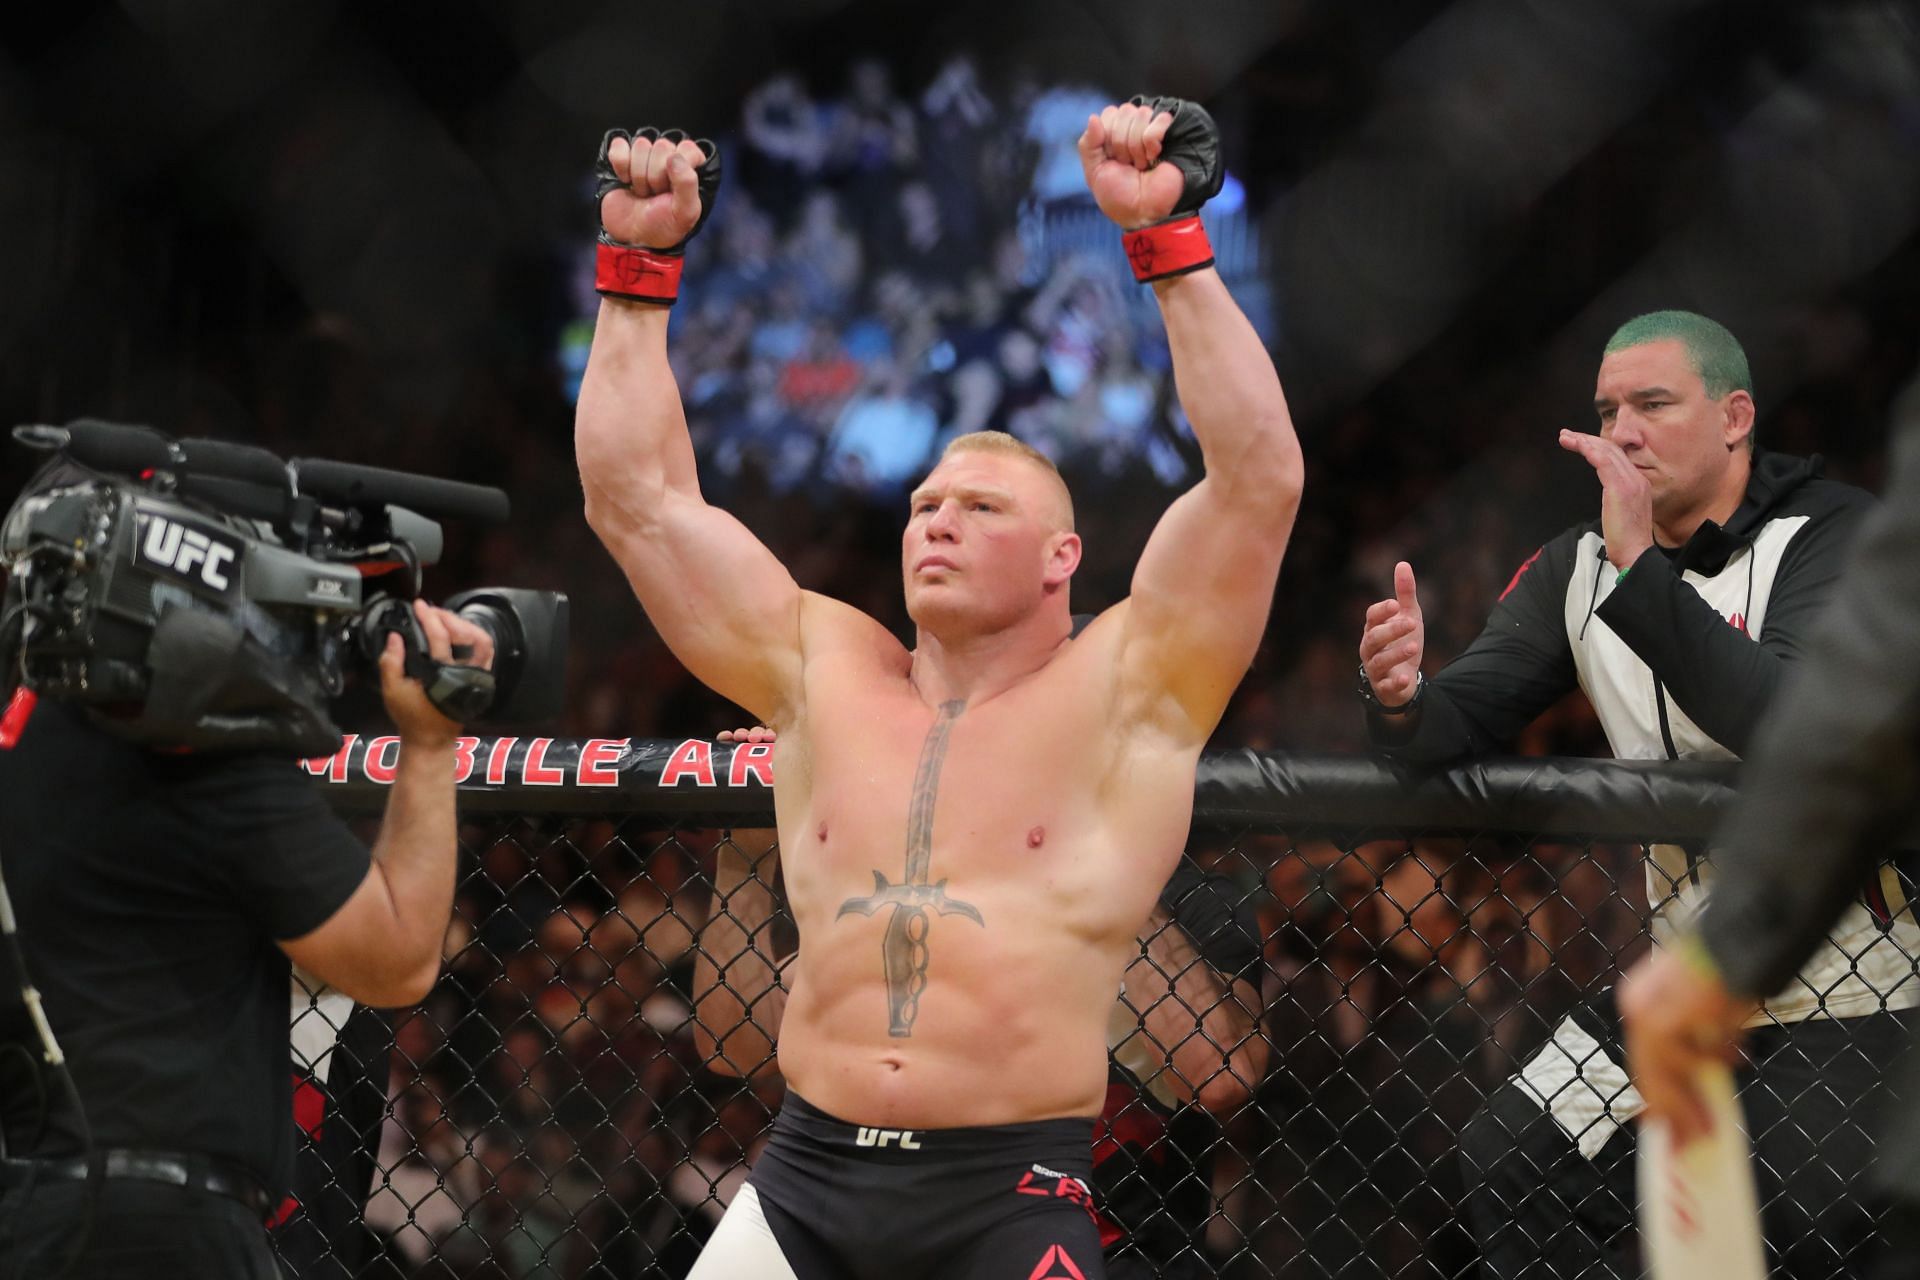 Brock Lesnar lost his octagon debut, but bounced back in style